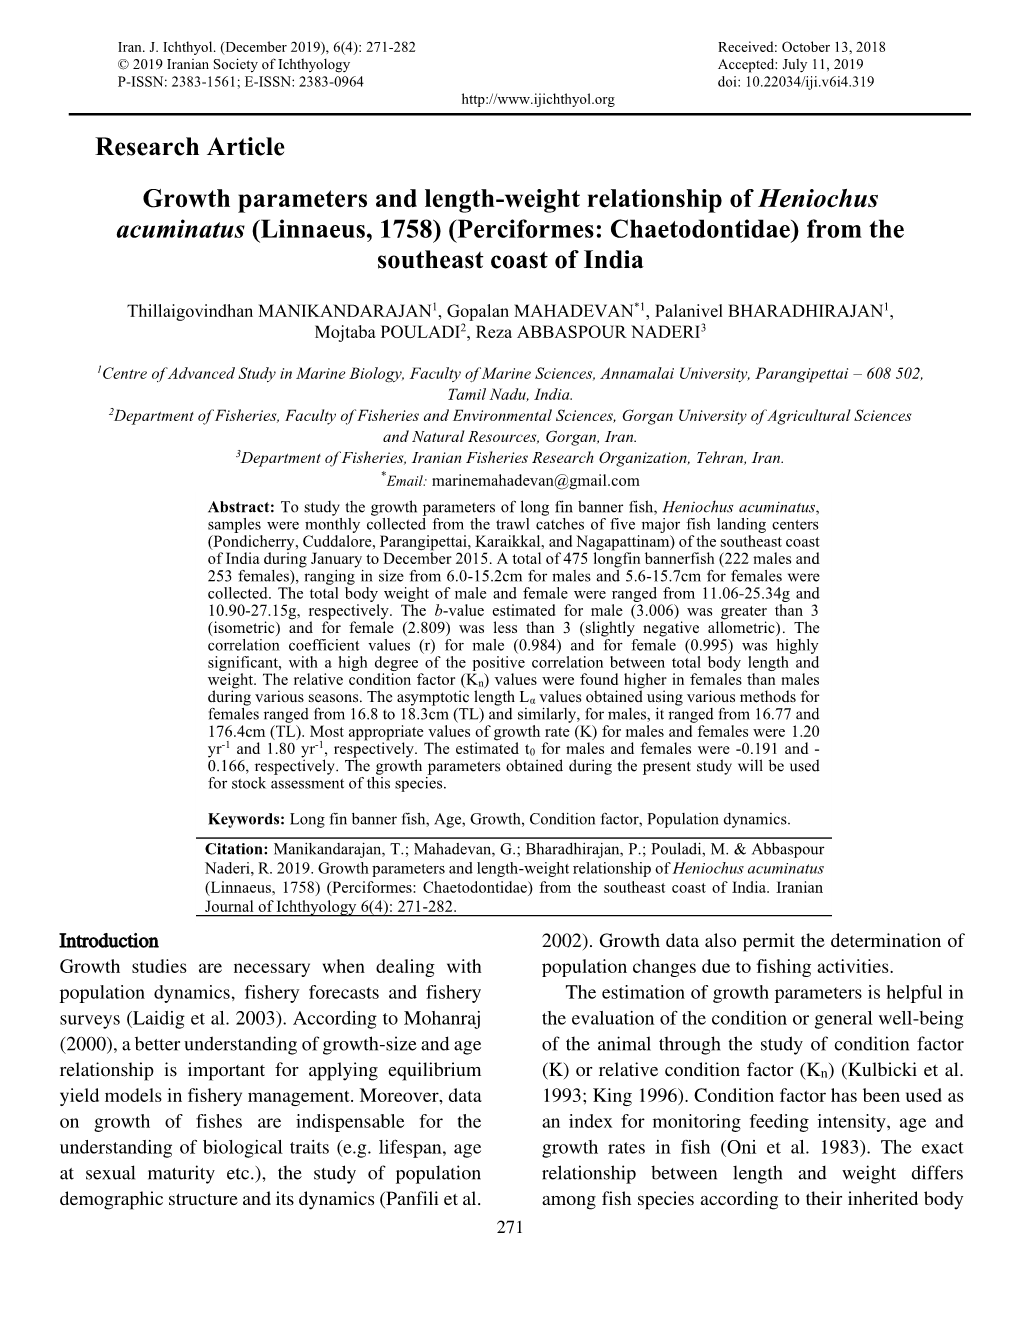 Research Article Growth Parameters and Length-Weight Relationship of Heniochus Acuminatus